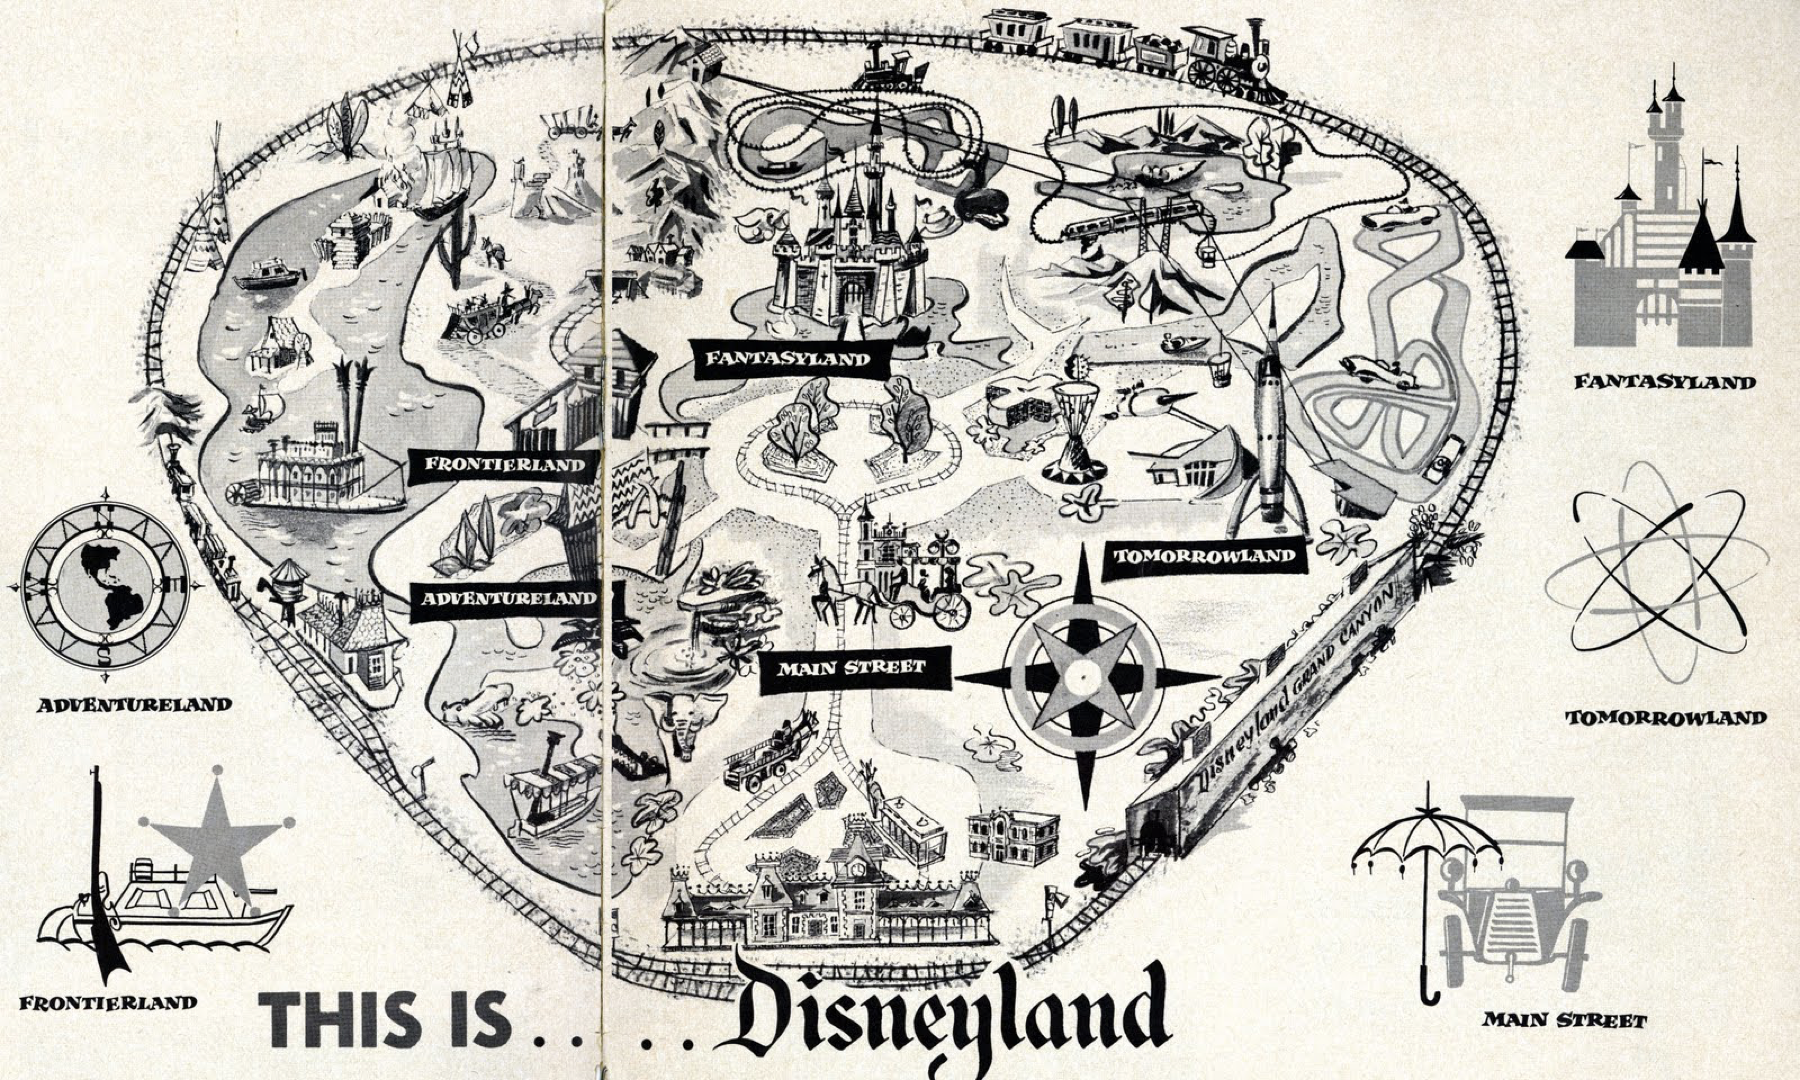 Scan of an early Disneyland map